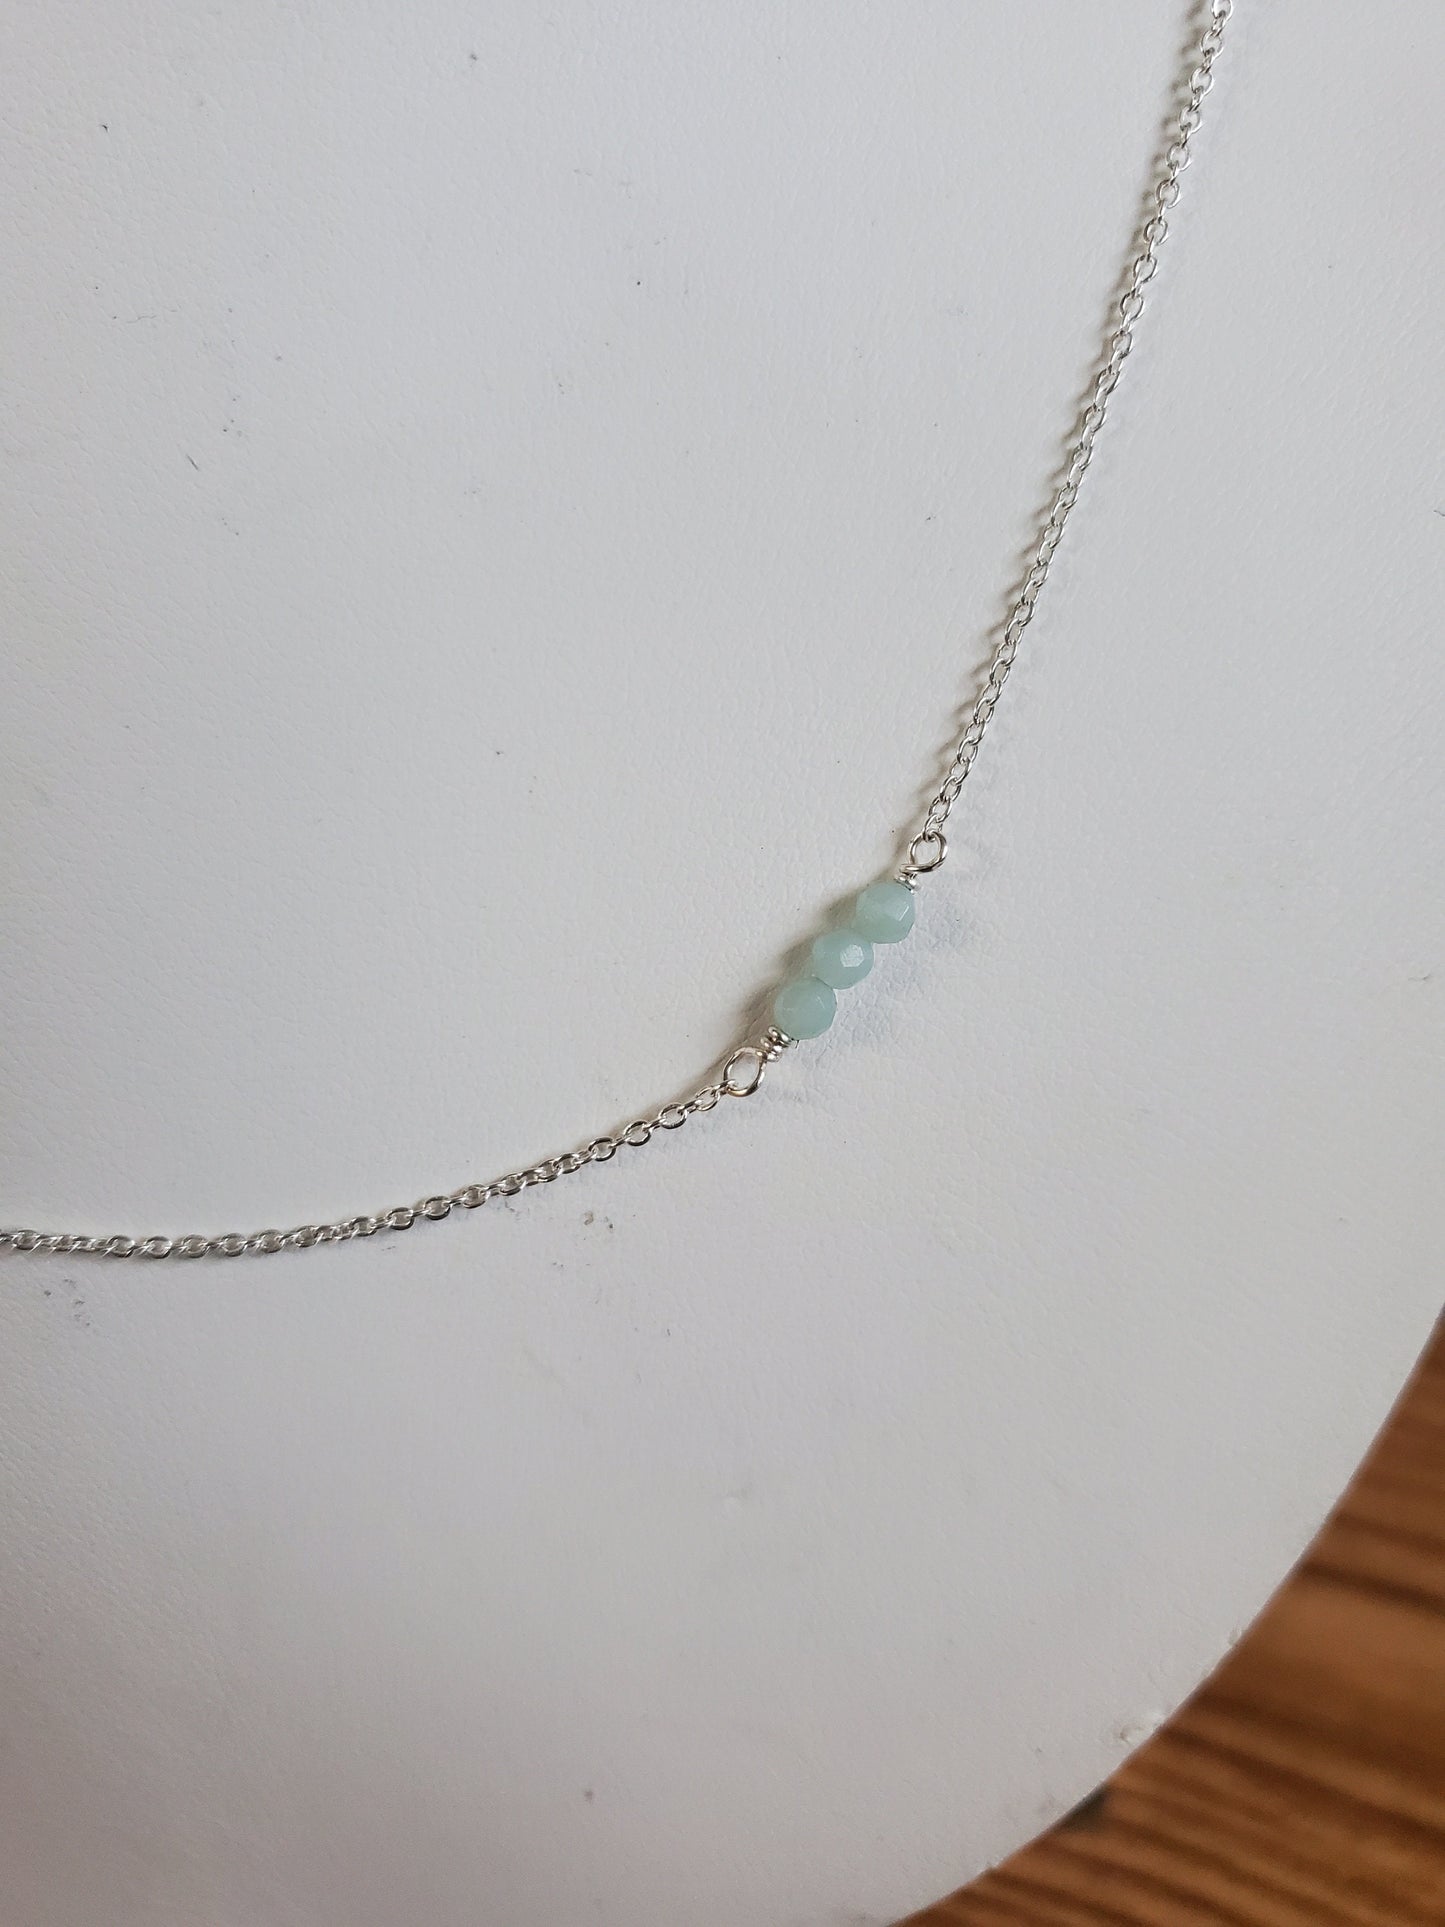 Delicate Amazonite and Sterling Silver Chain Necklace